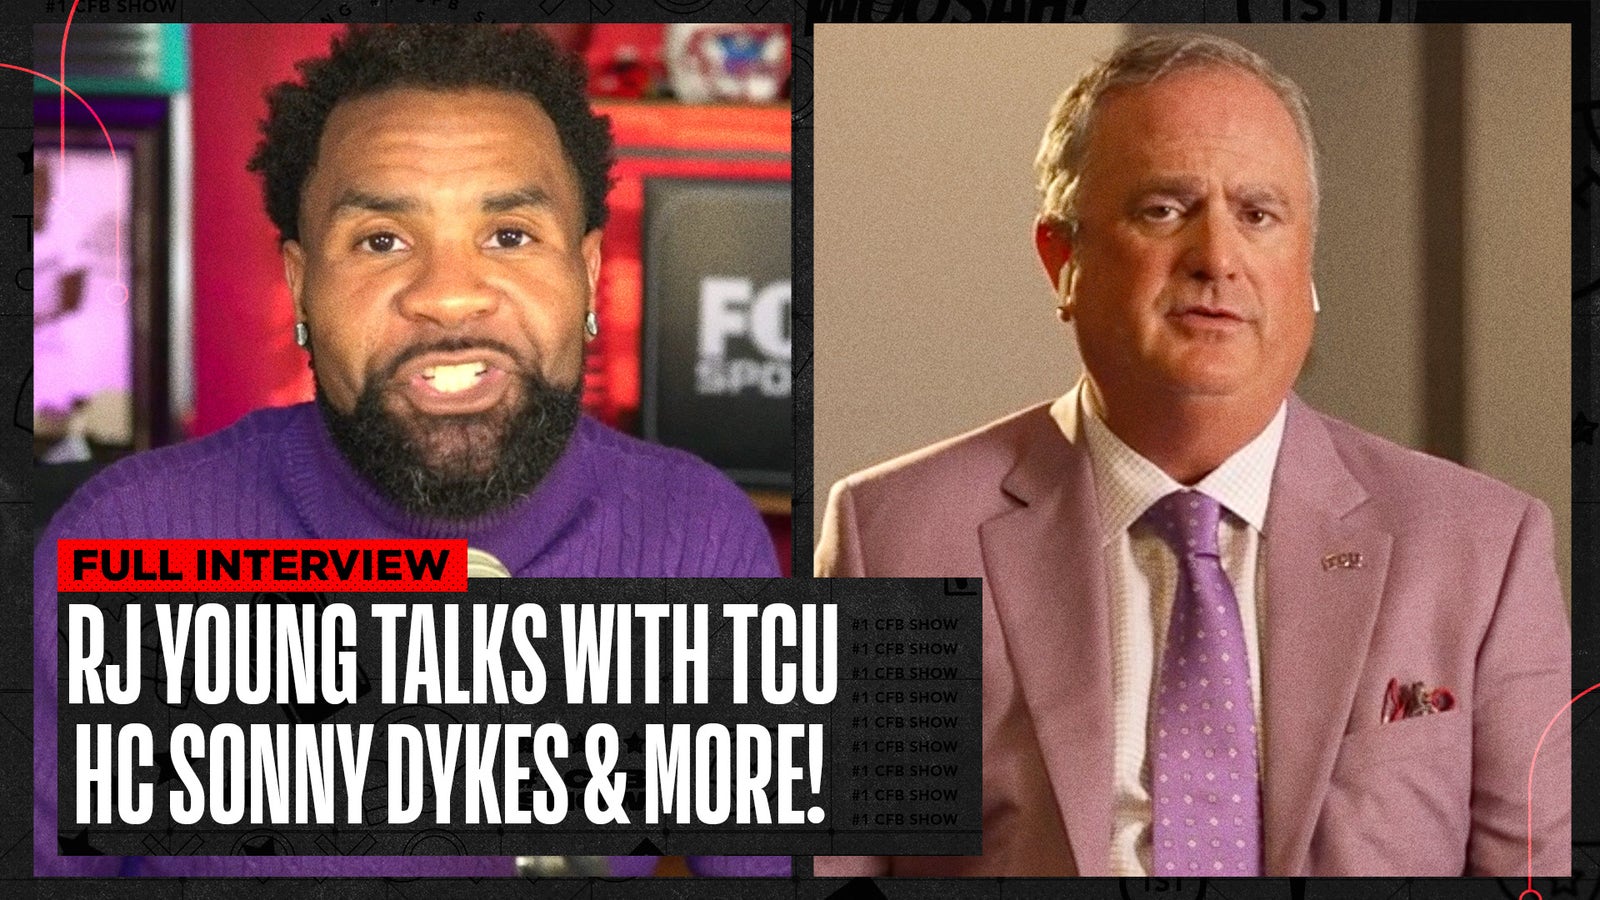 TCU's Sonny Dykes and Bud Clark from Big 12 Media Day